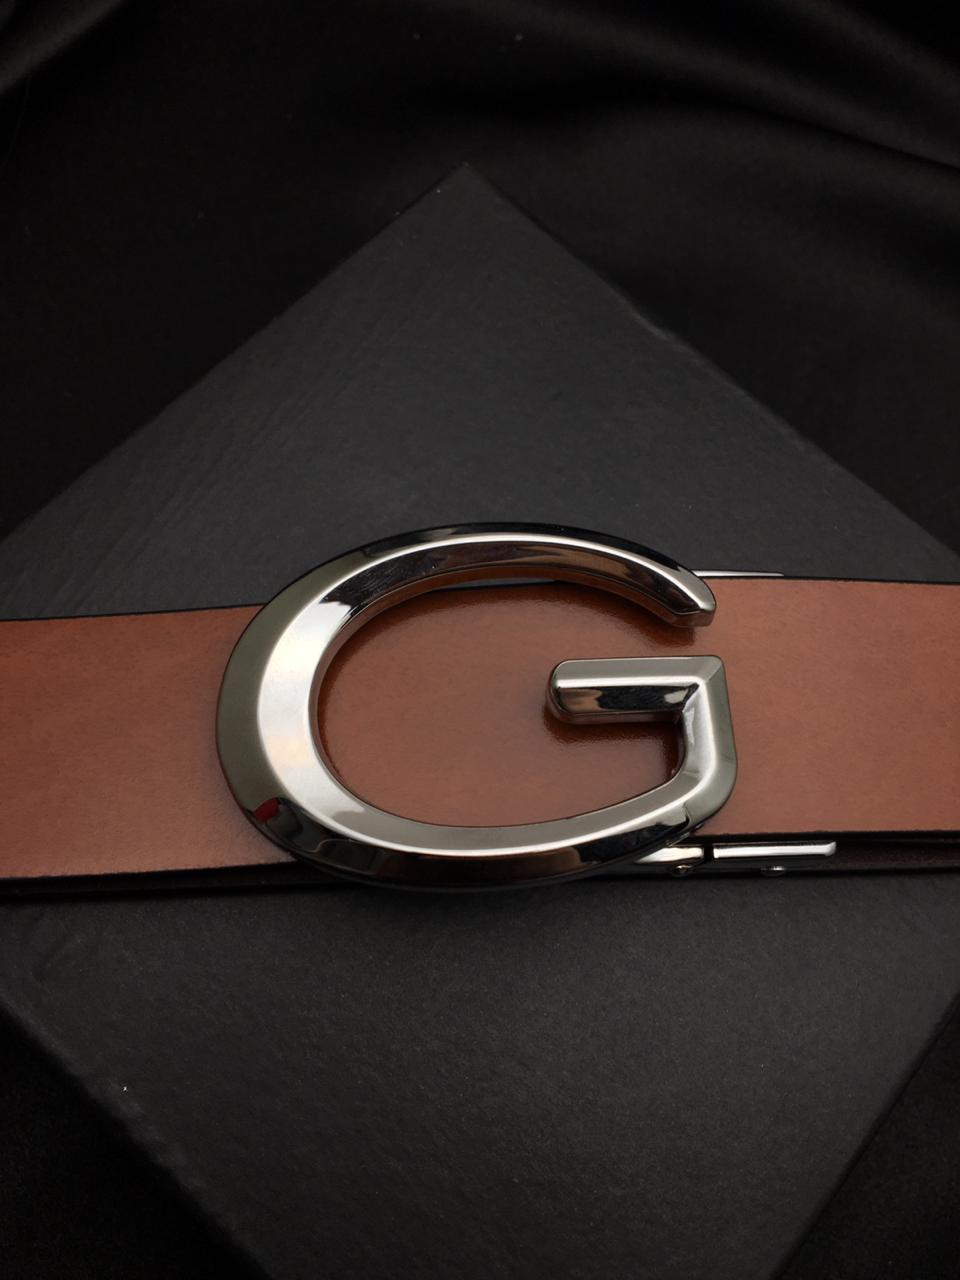 Classic G-Design Buckle High Quality Leather Belts For Men-Unique and Classy